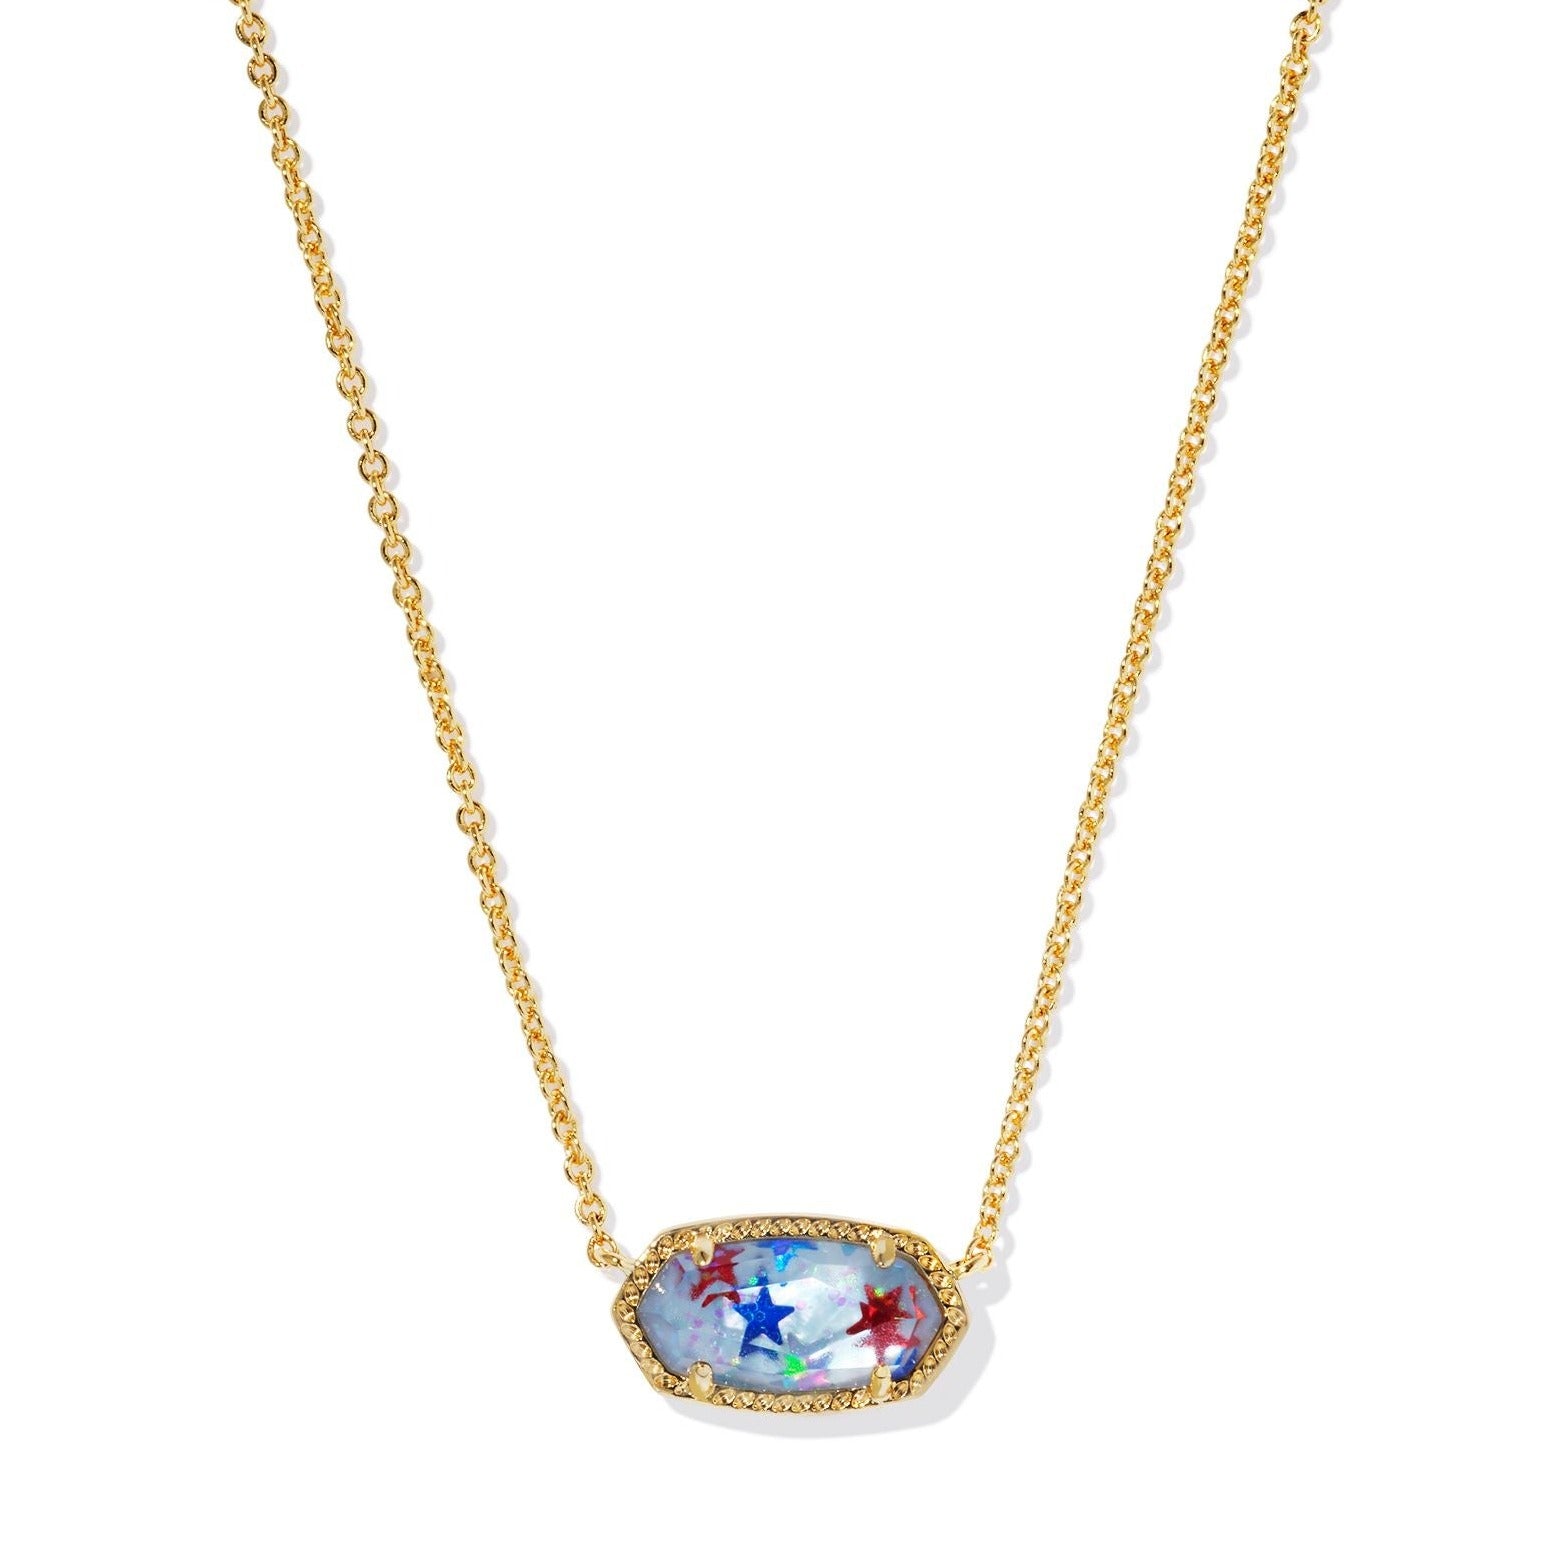 Kendra Scott | Elisa Gold Short Pendant Necklace in Red, White, and Blue Illusion - Giddy Up Glamour Boutique